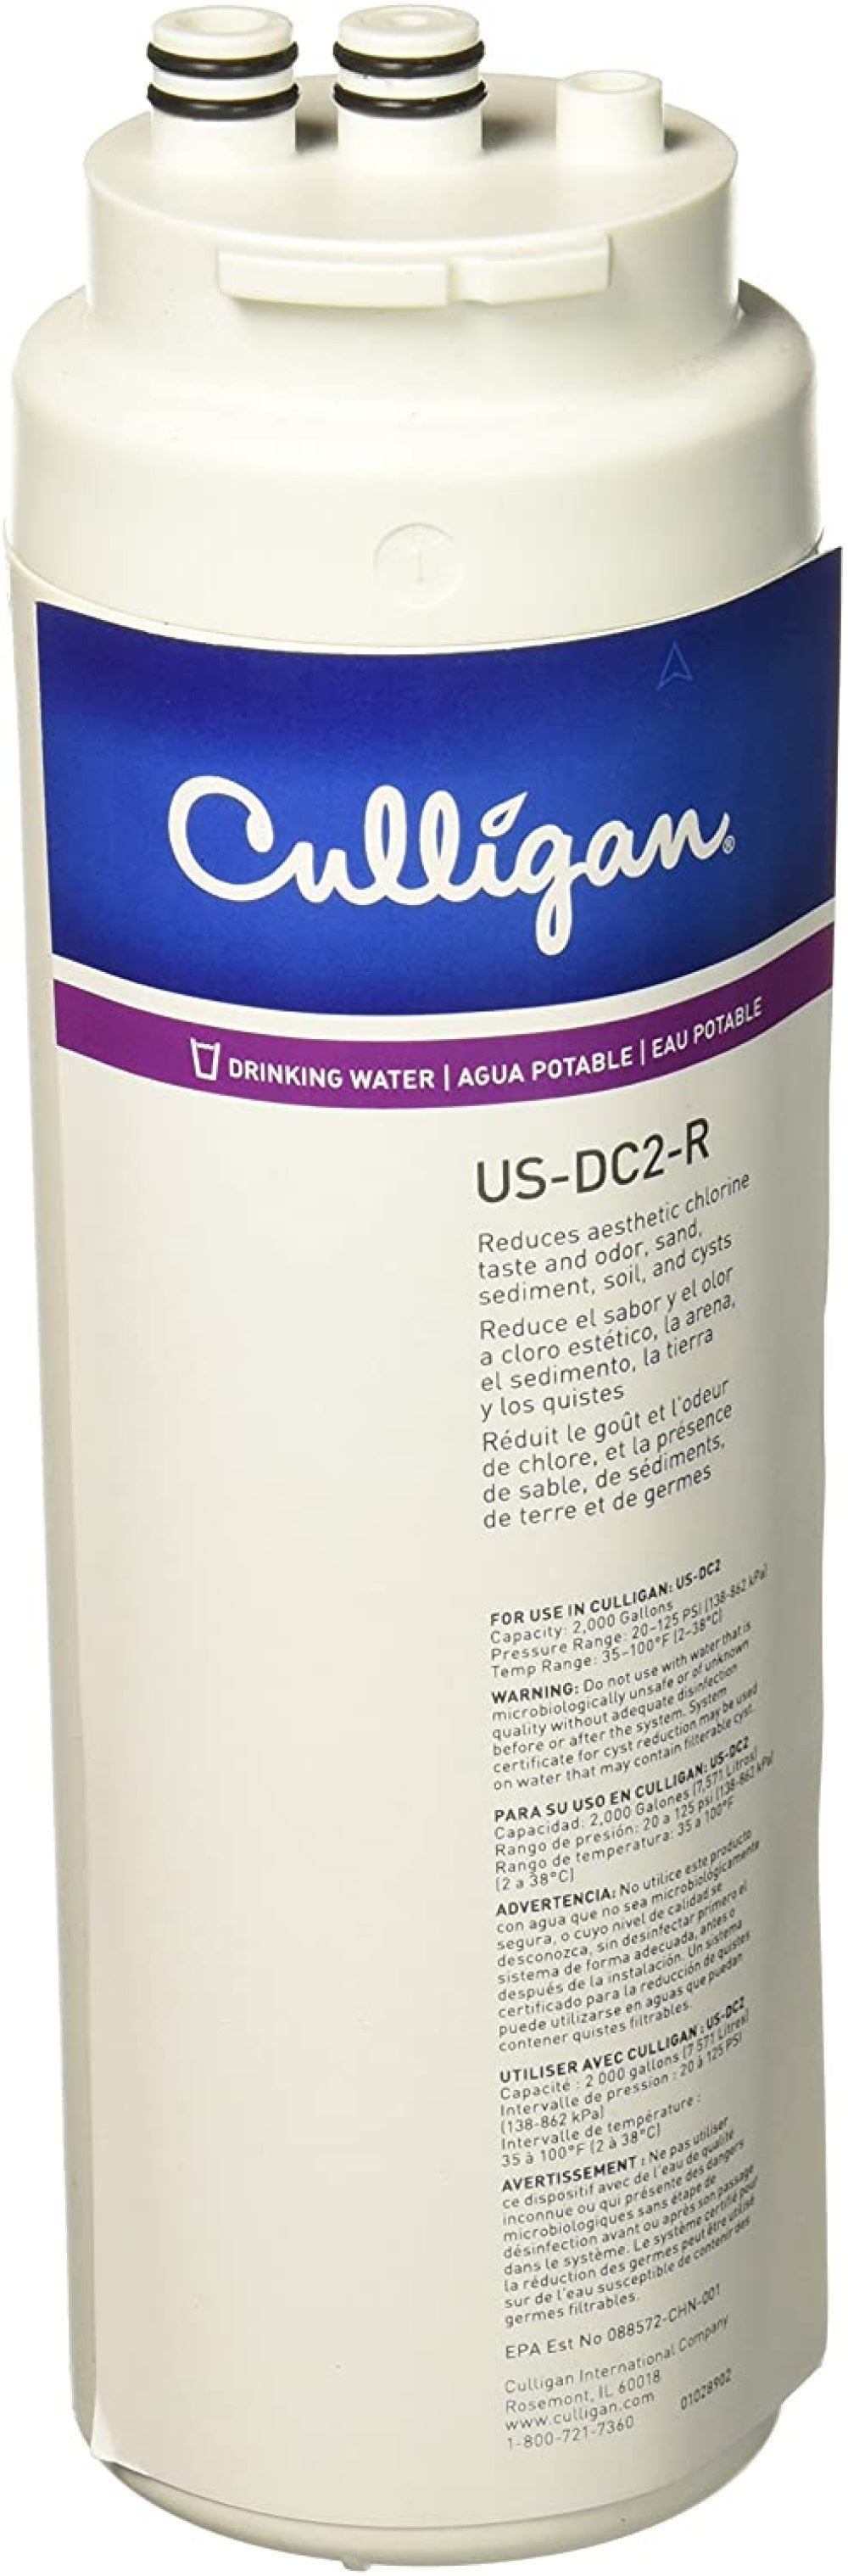 CULLIGAN US-DC-2 Water Filter Housing w/ cyst removal 